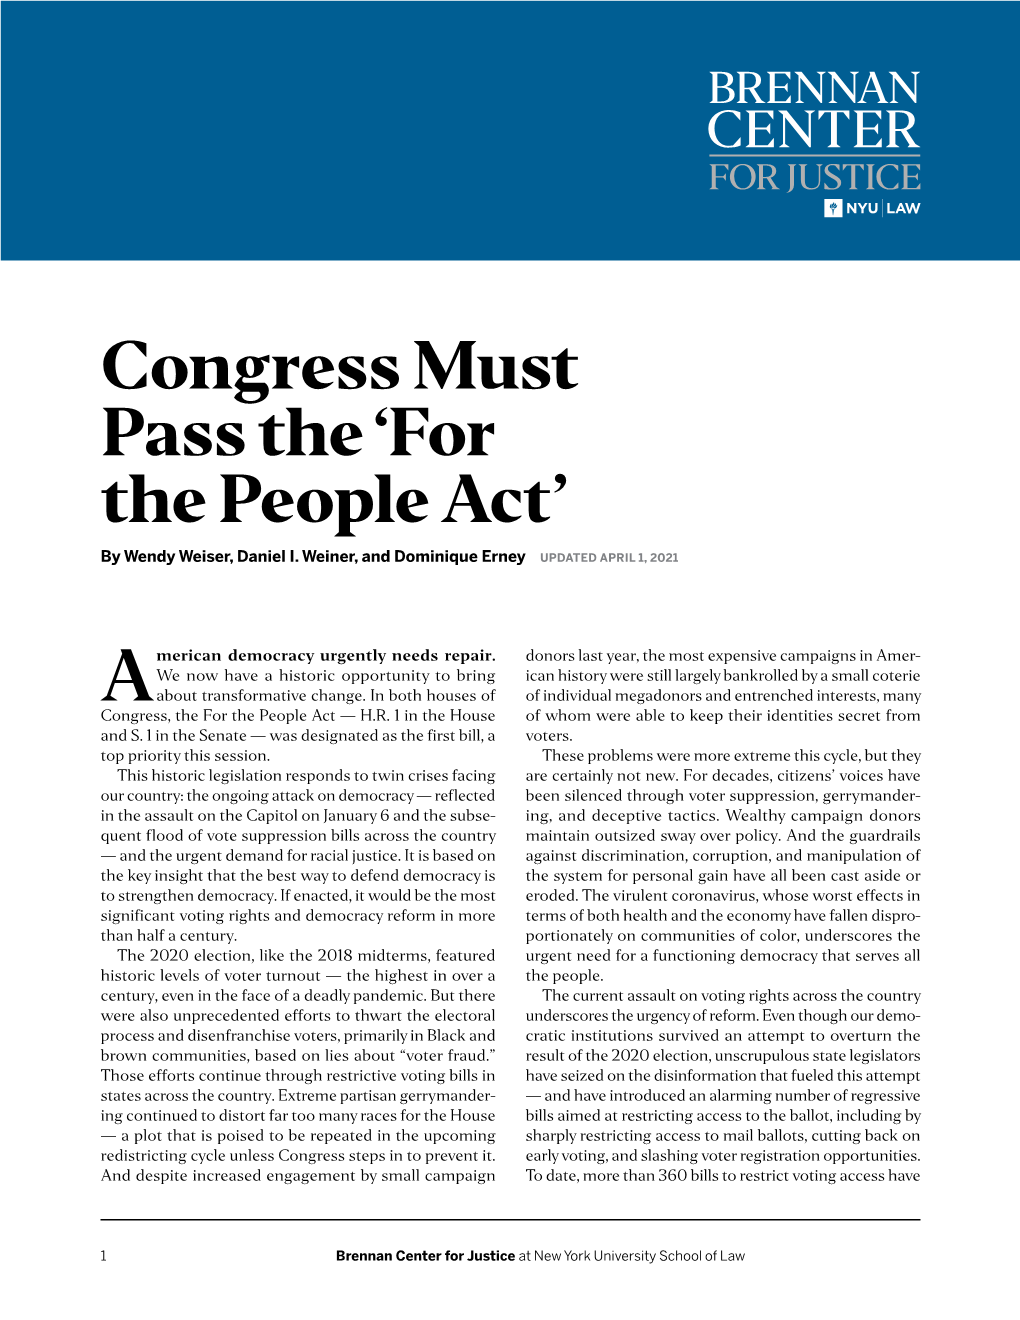 For the People Act’ by Wendy Weiser, Daniel I